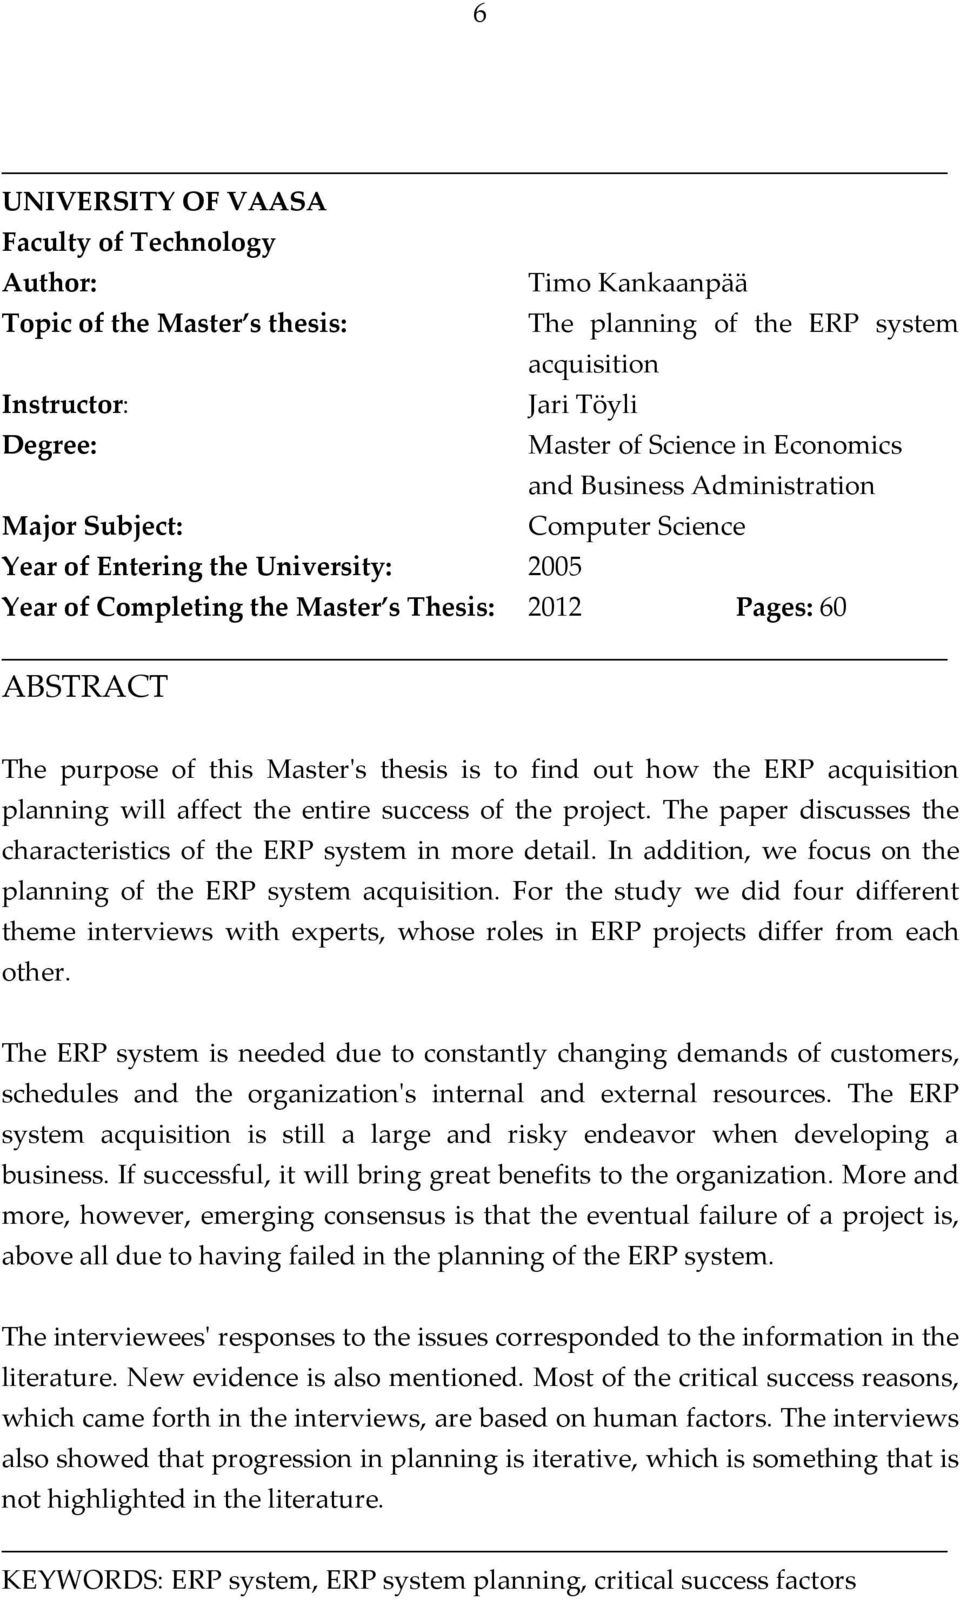 thesis is to find out how the ERP acquisition planning will affect the entire success of the project. The paper discusses the characteristics of the ERP system in more detail.